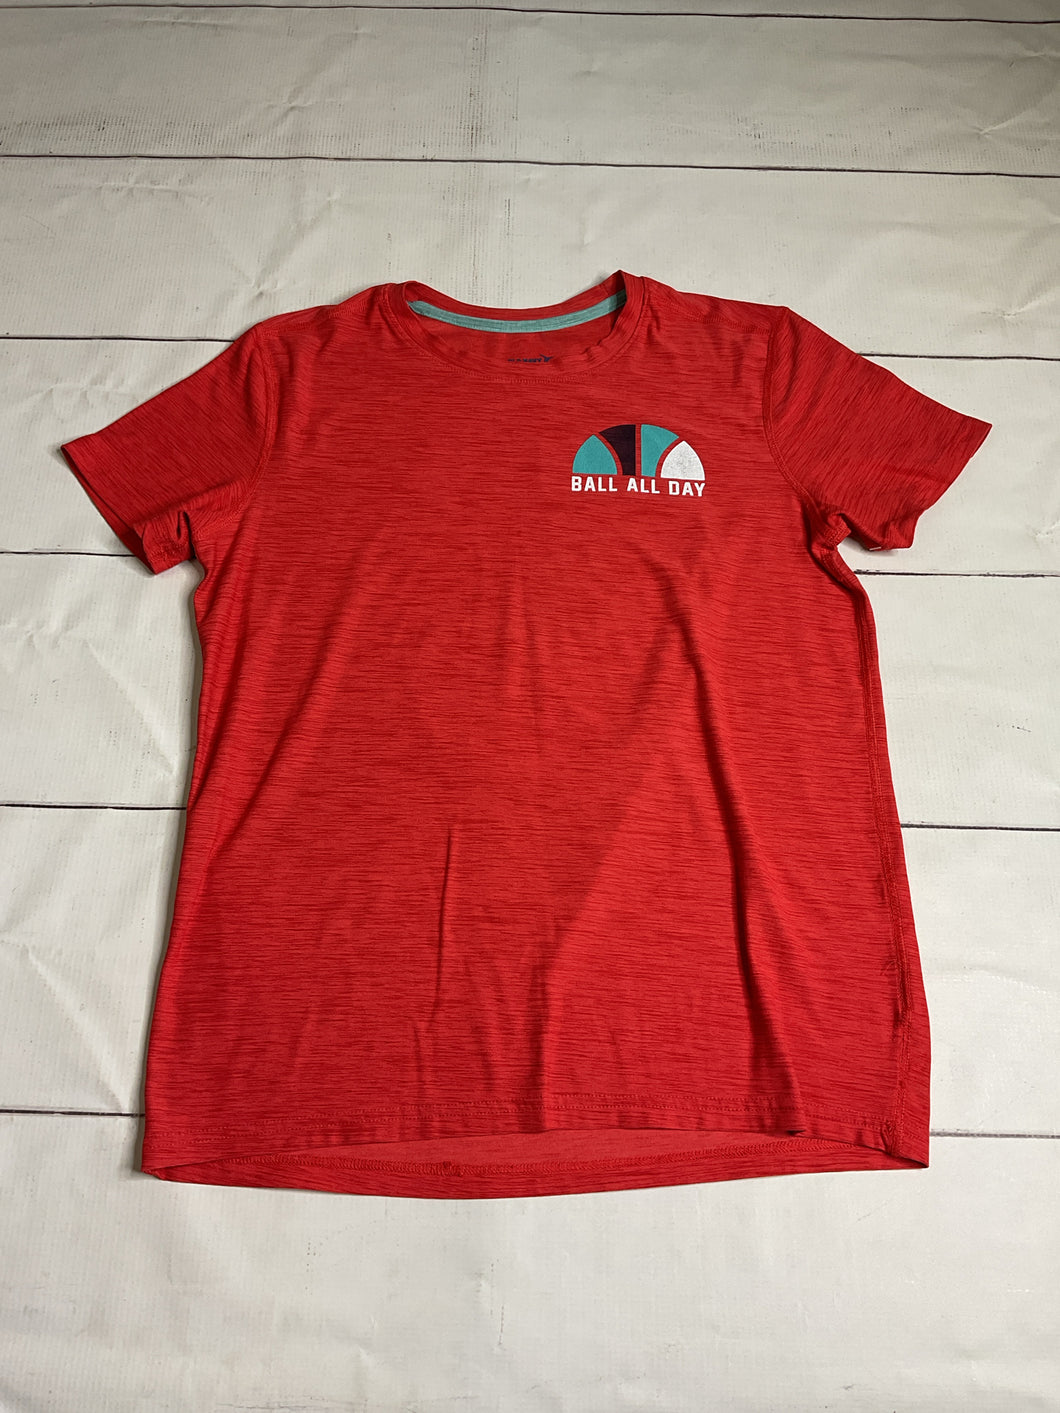 Old Navy Size 14/16 Tshirt